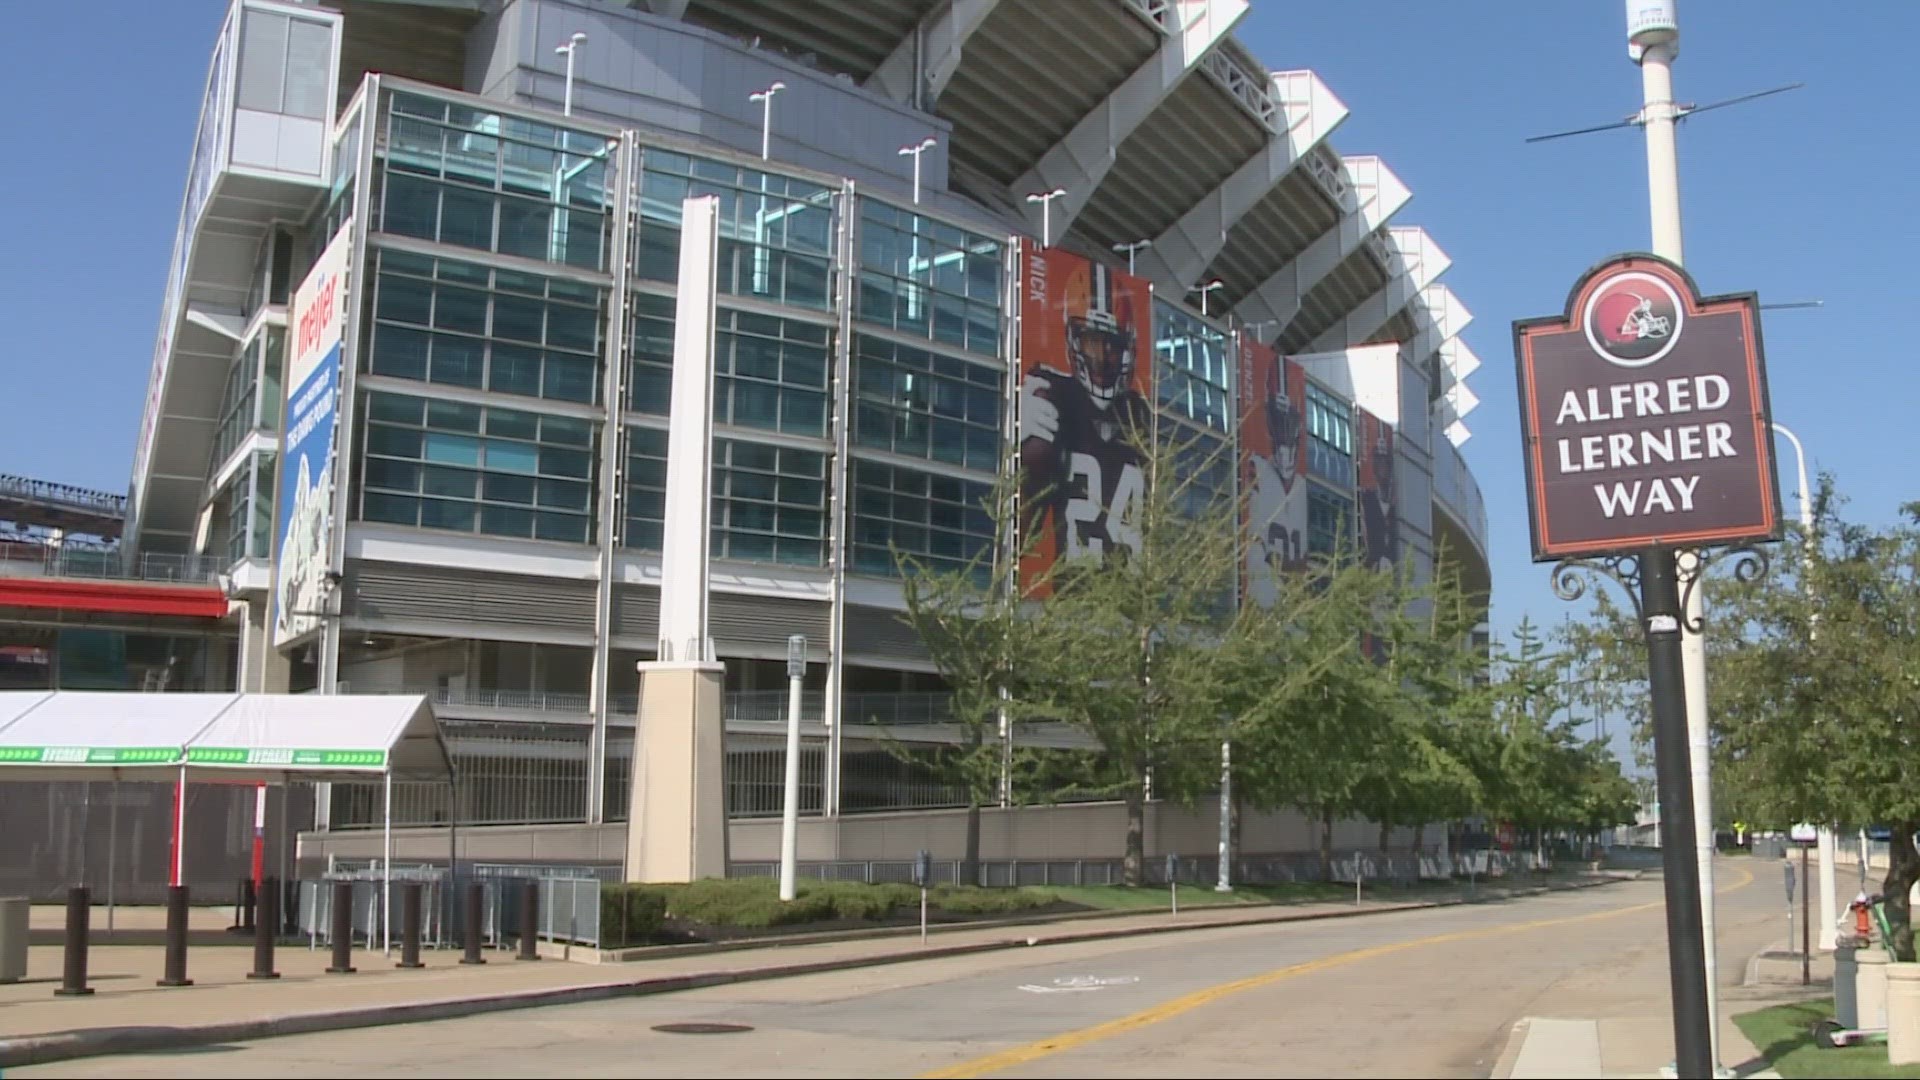 Here's what fans can expect this season at Cleveland Browns Stadium.